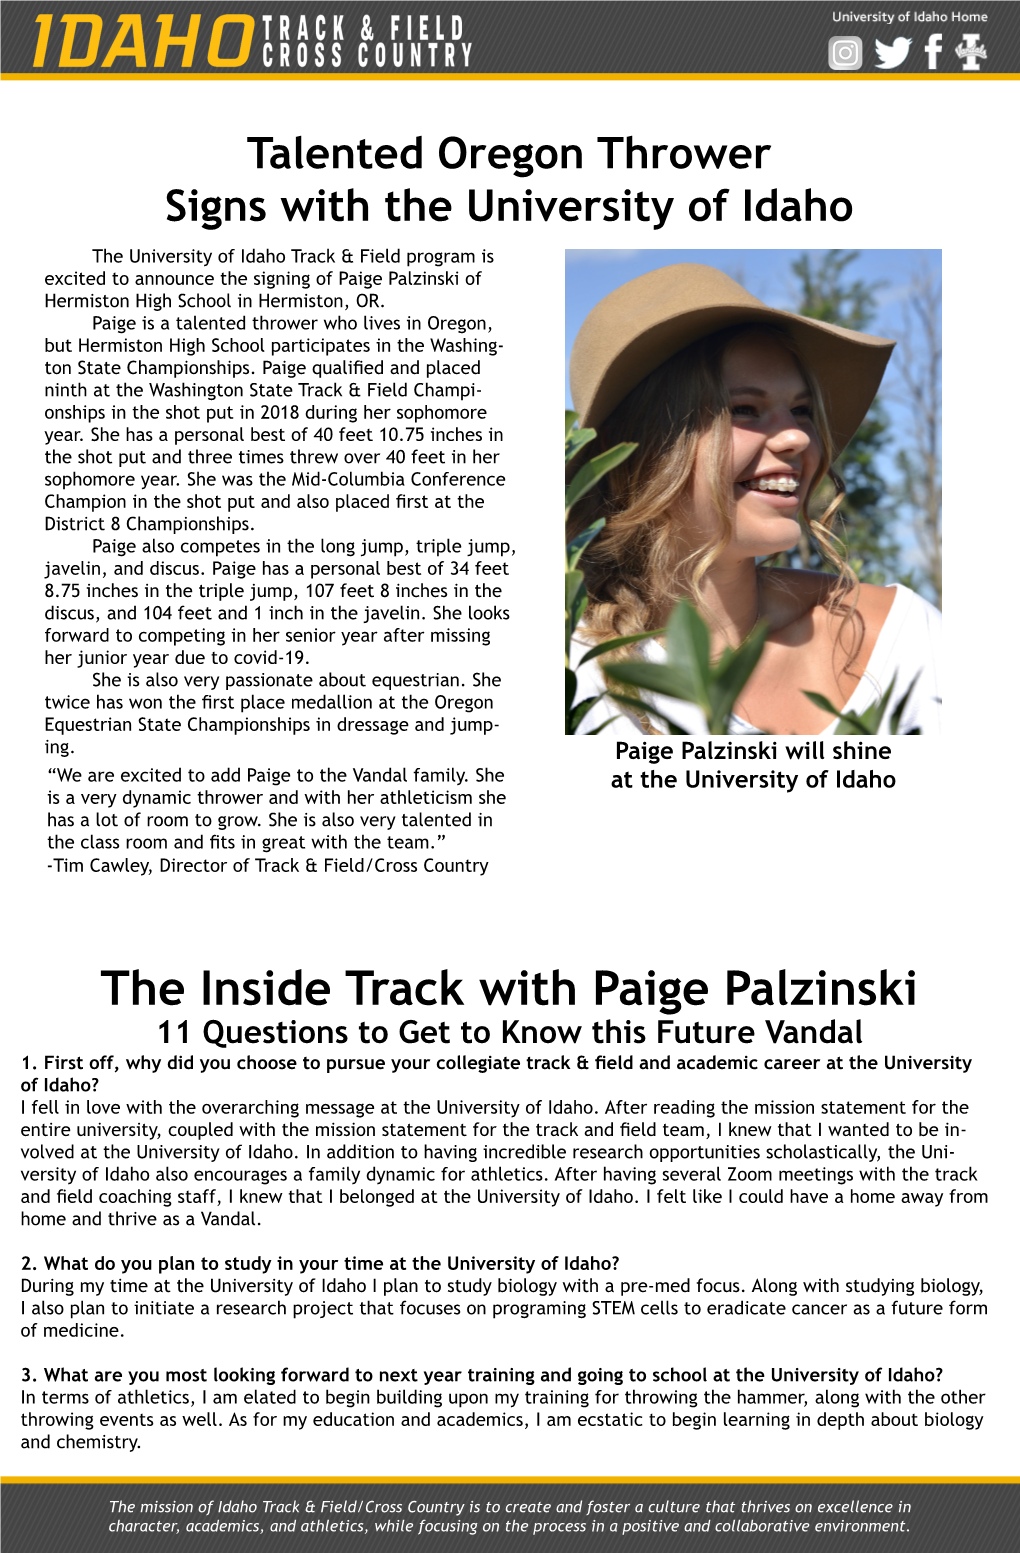 The Inside Track with Paige Palzinski 11 Questions to Get to Know This Future Vandal 1